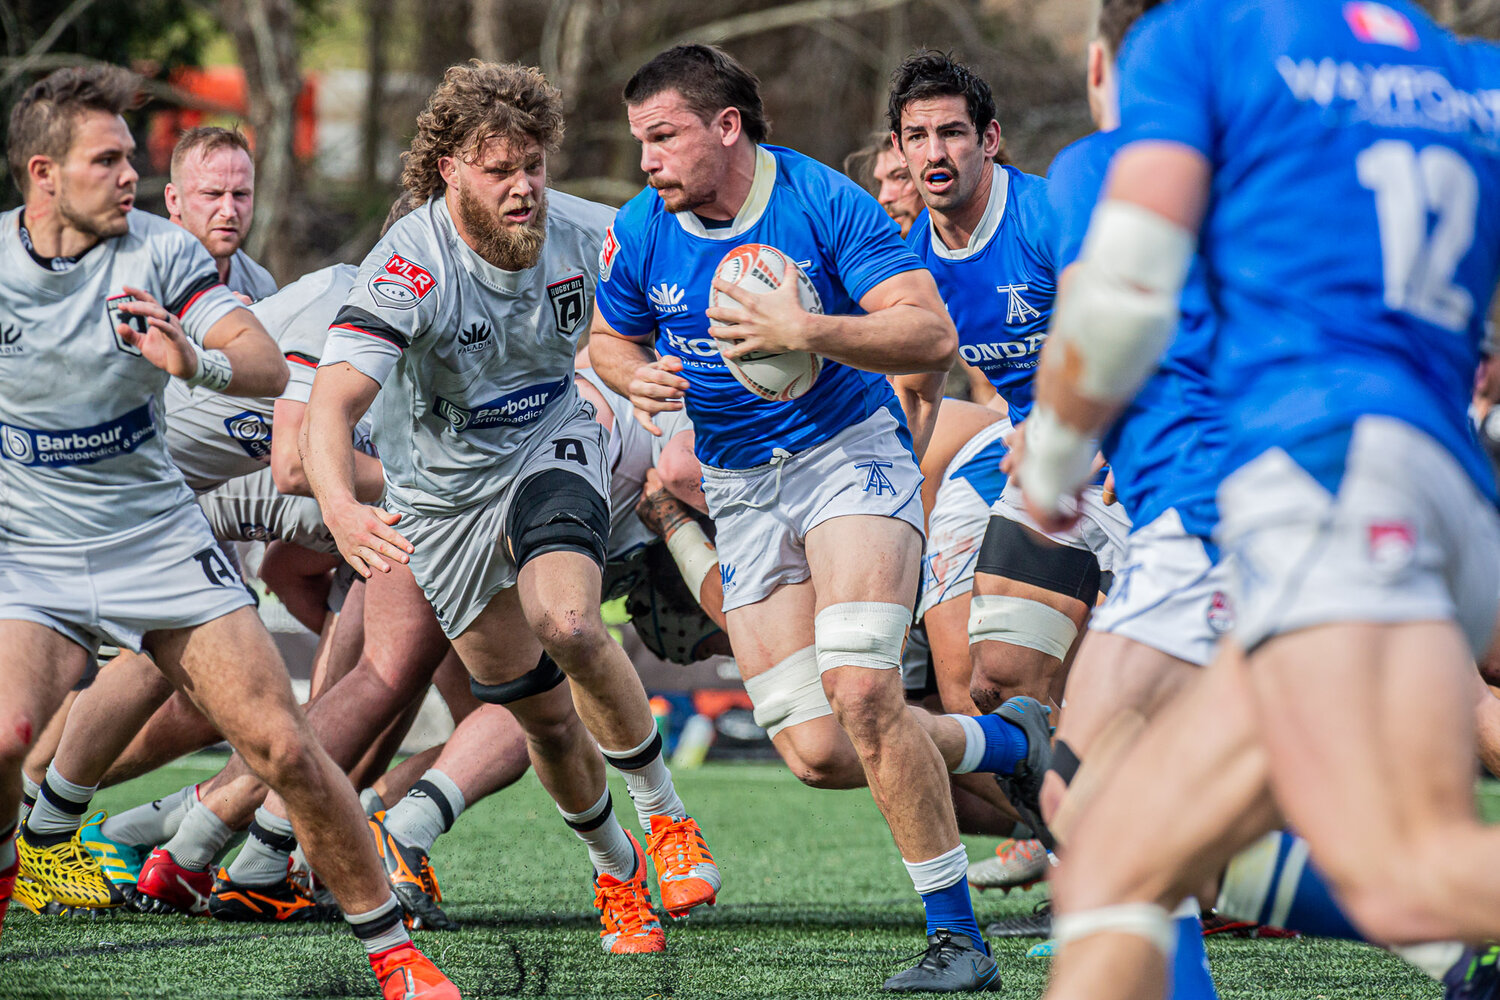 Arrows Use Big Second-Half Performance to Get Past Rugby ATL